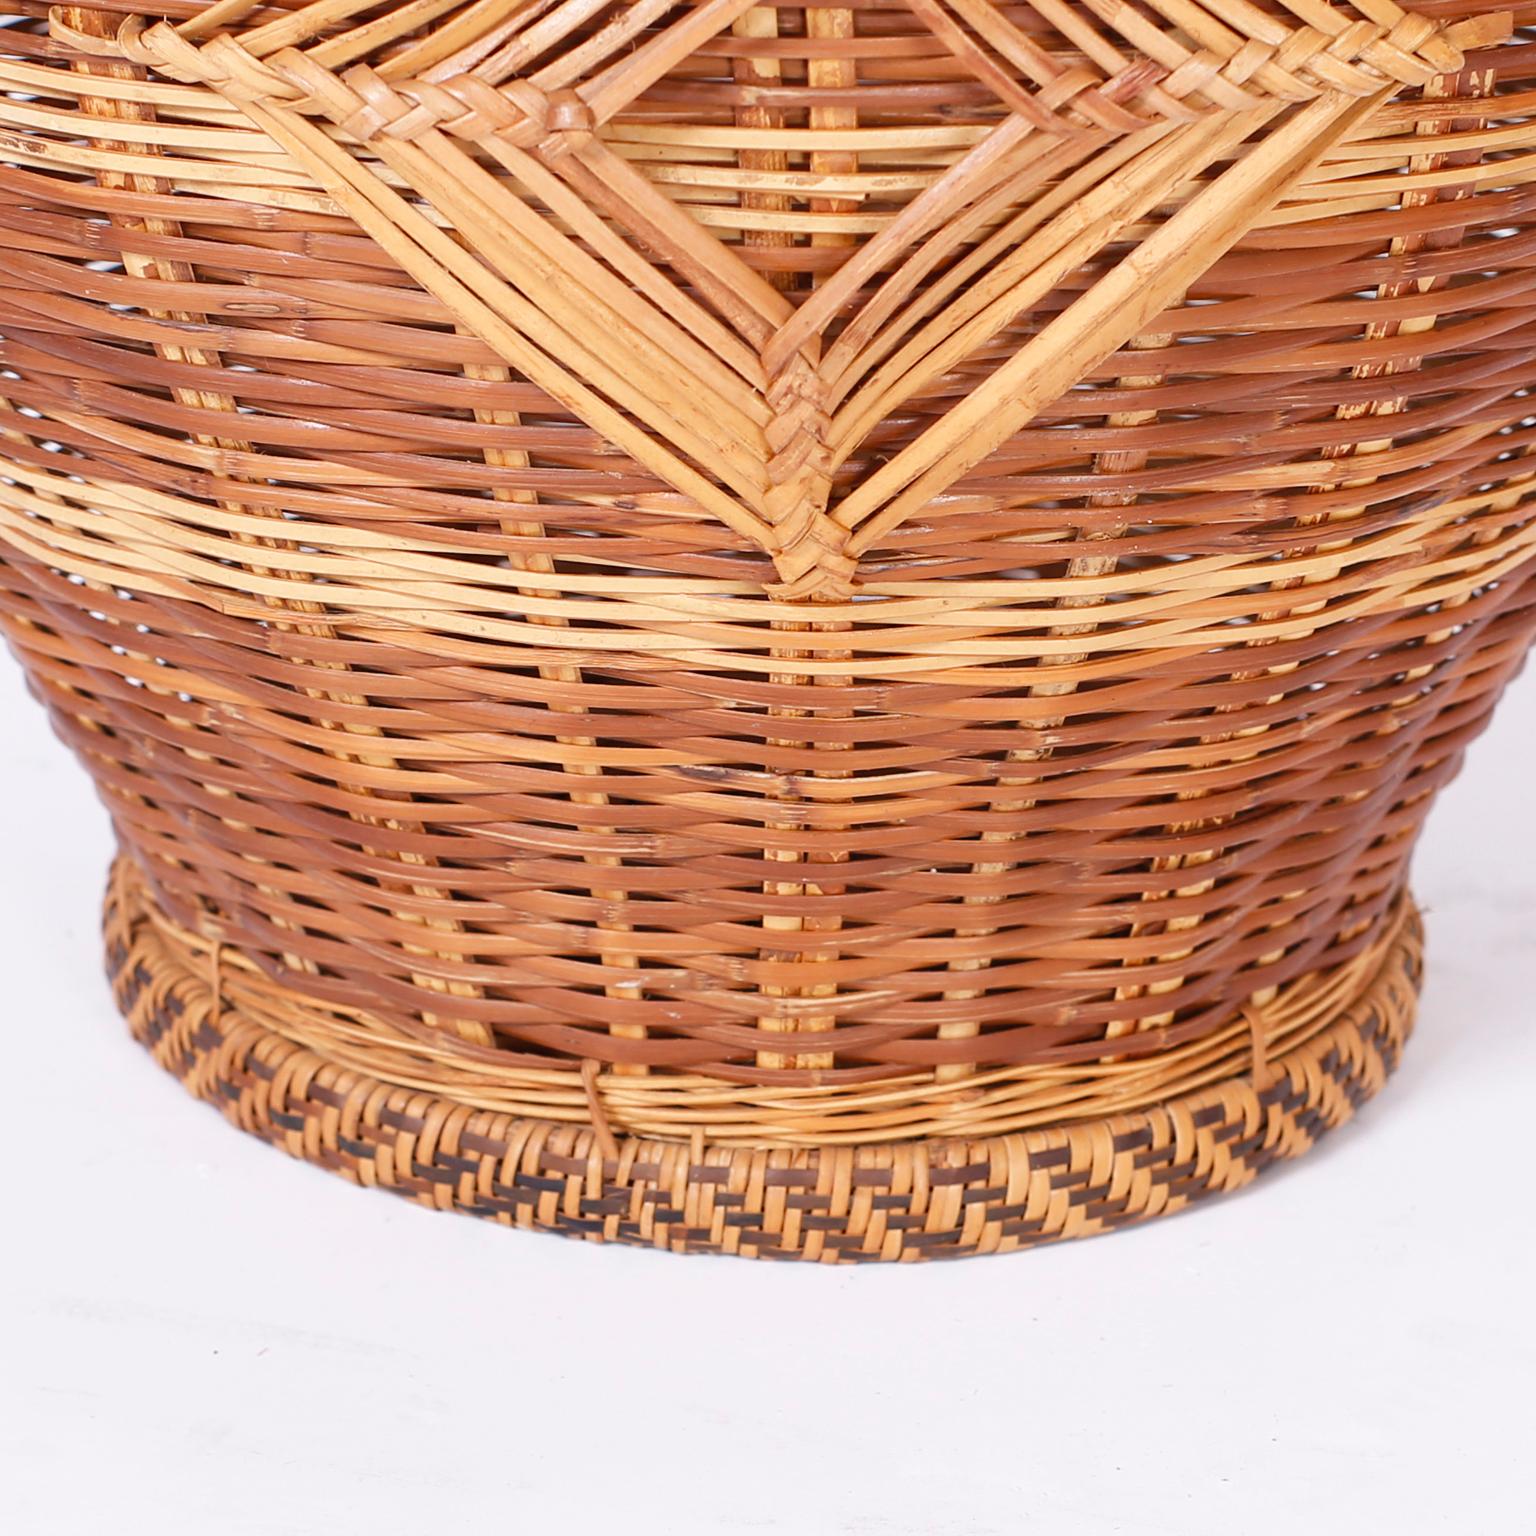 Indian Two Lidded Wicker Baskets, Priced Individually